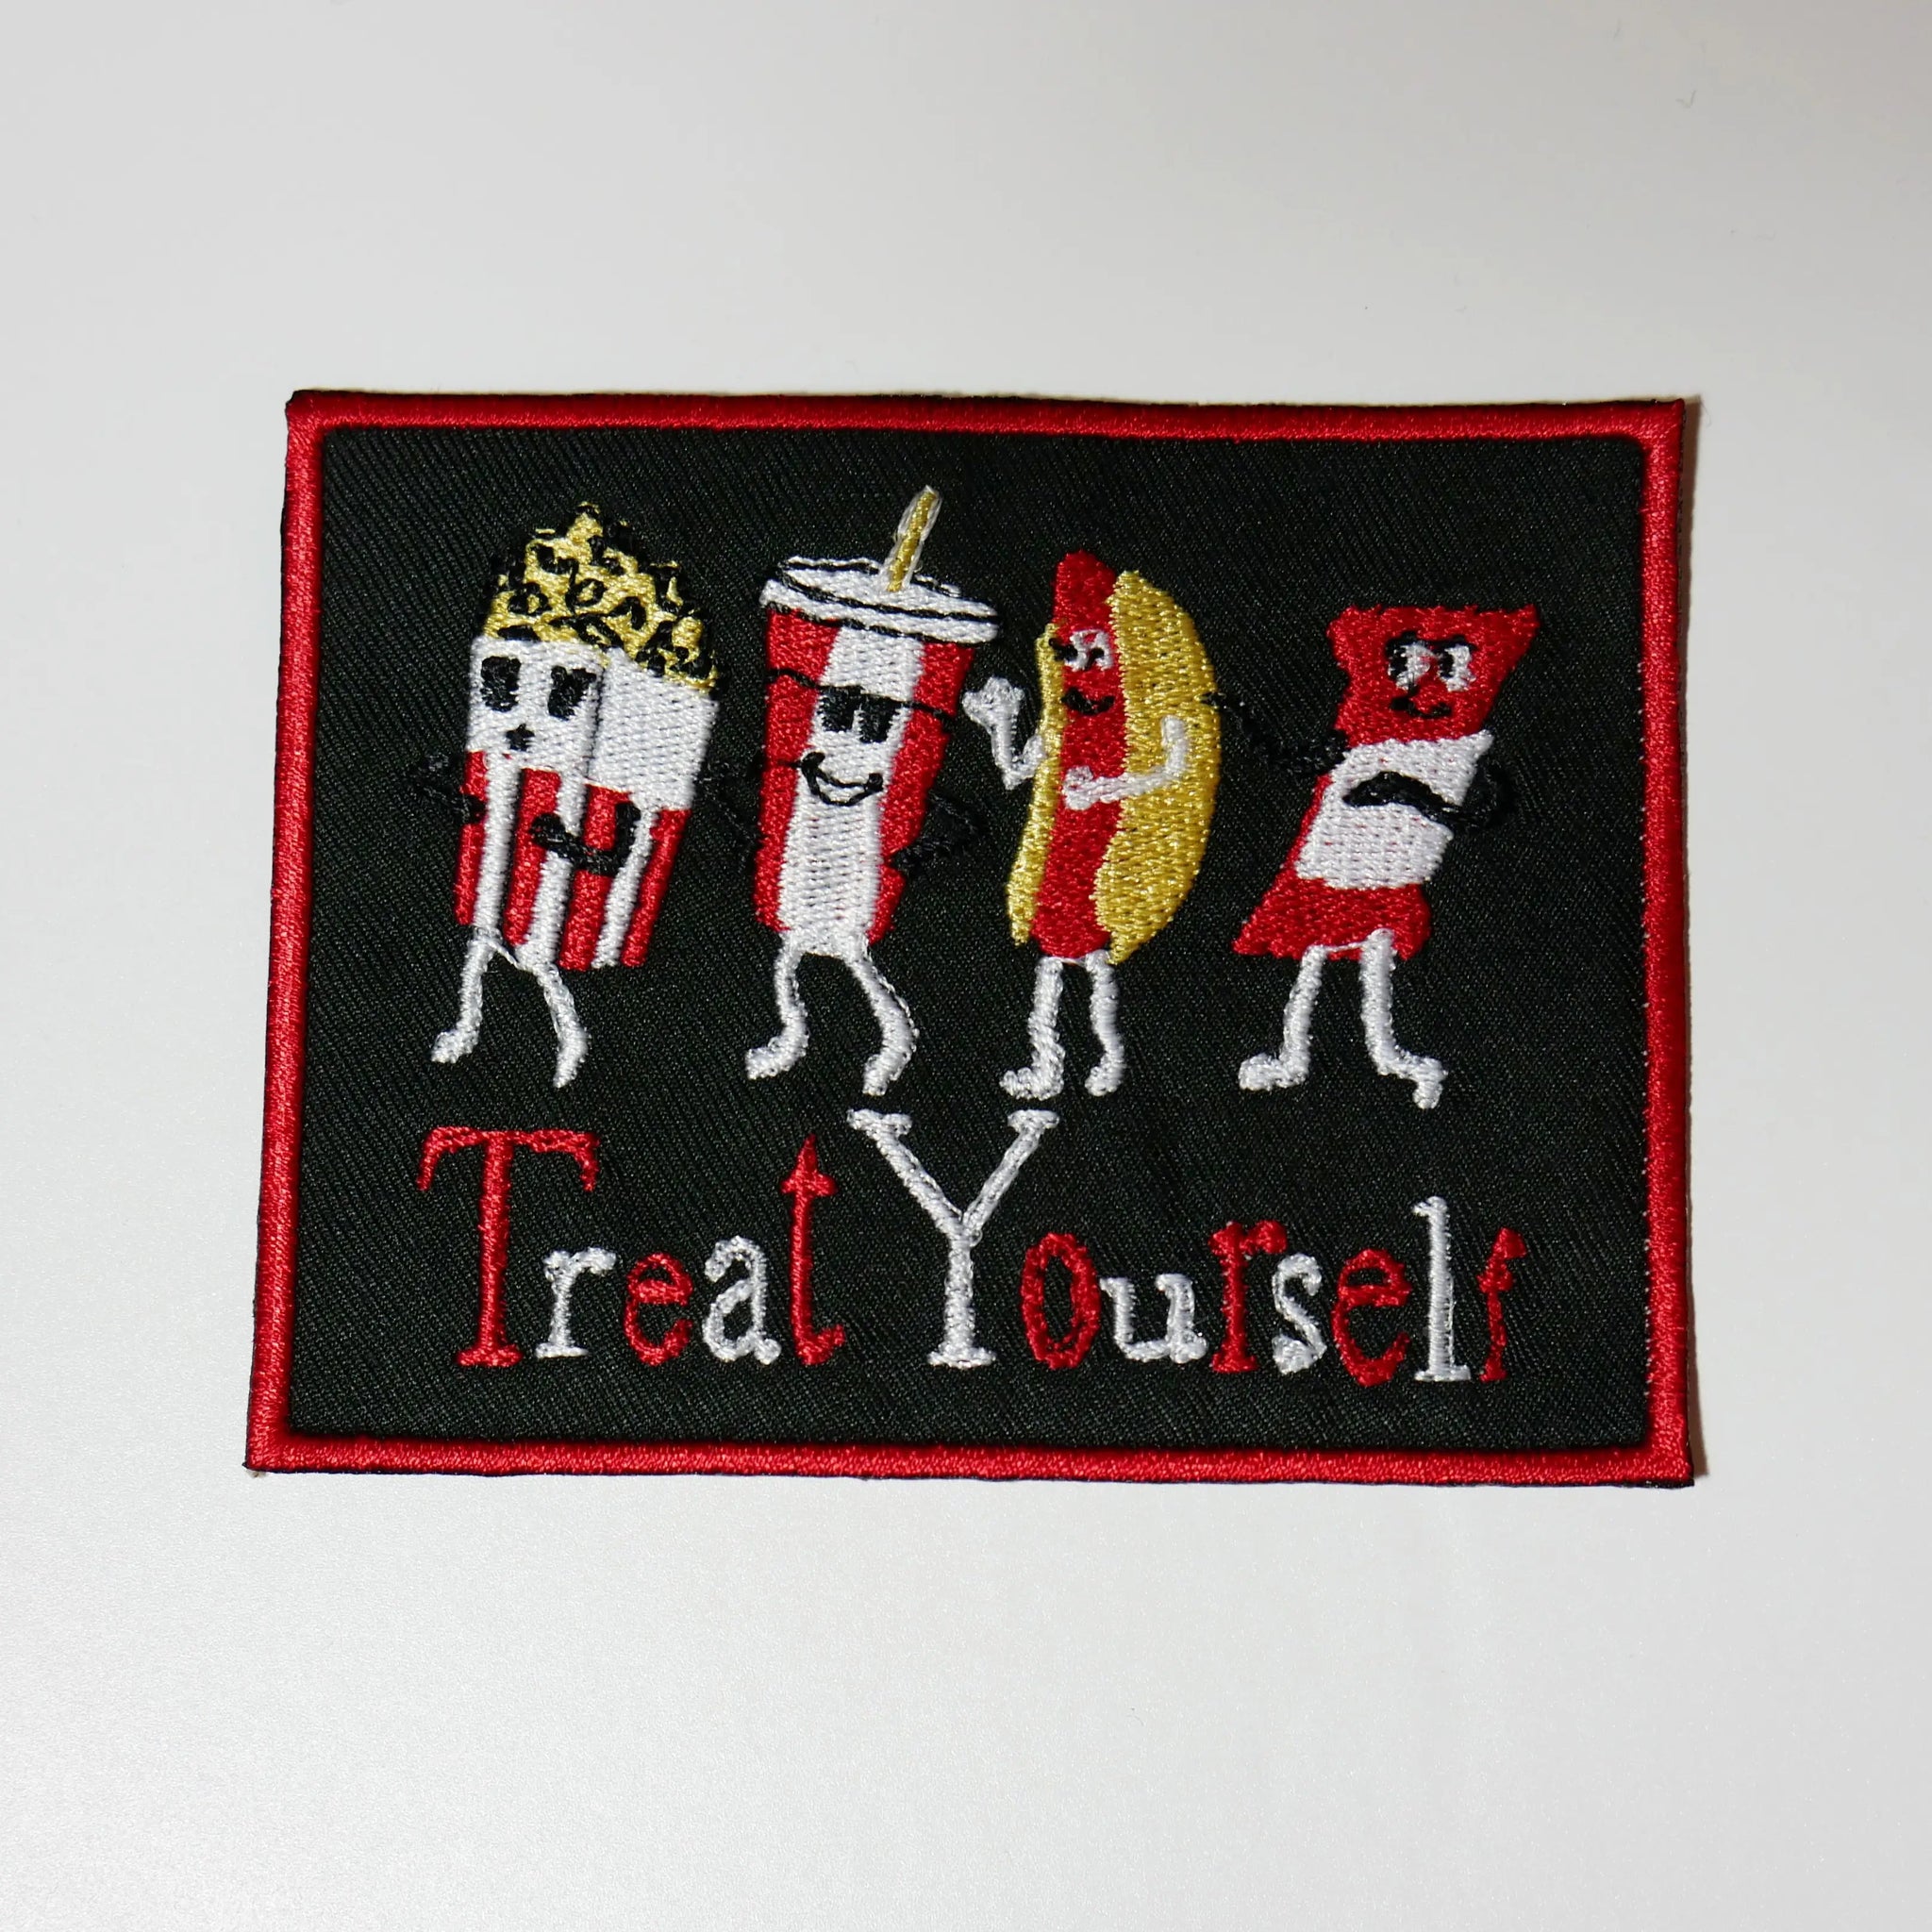 A rectangular patch depicting four classic movie theater treats with smiling faces- popcorn, soda, a hot dog, and a candy bar. Black canvas with a red border and lettering “Treat Yourself” in red and white 